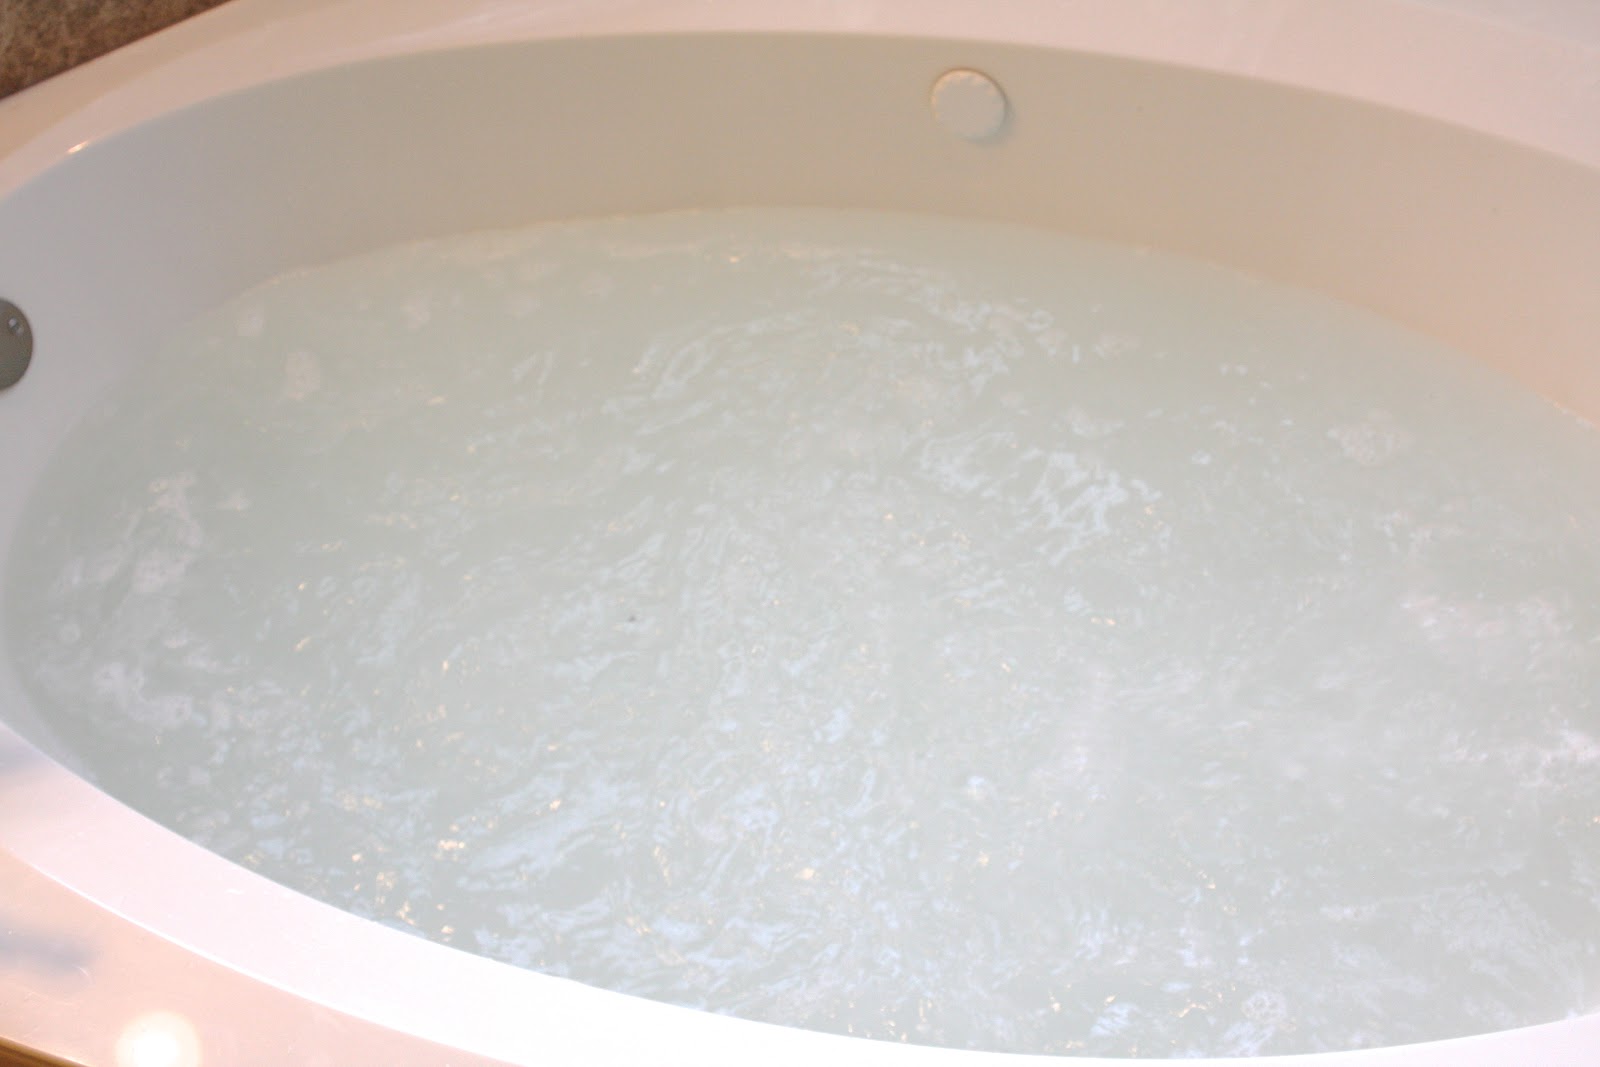 How To Clean Whirlpool Tub Jets - simply organized